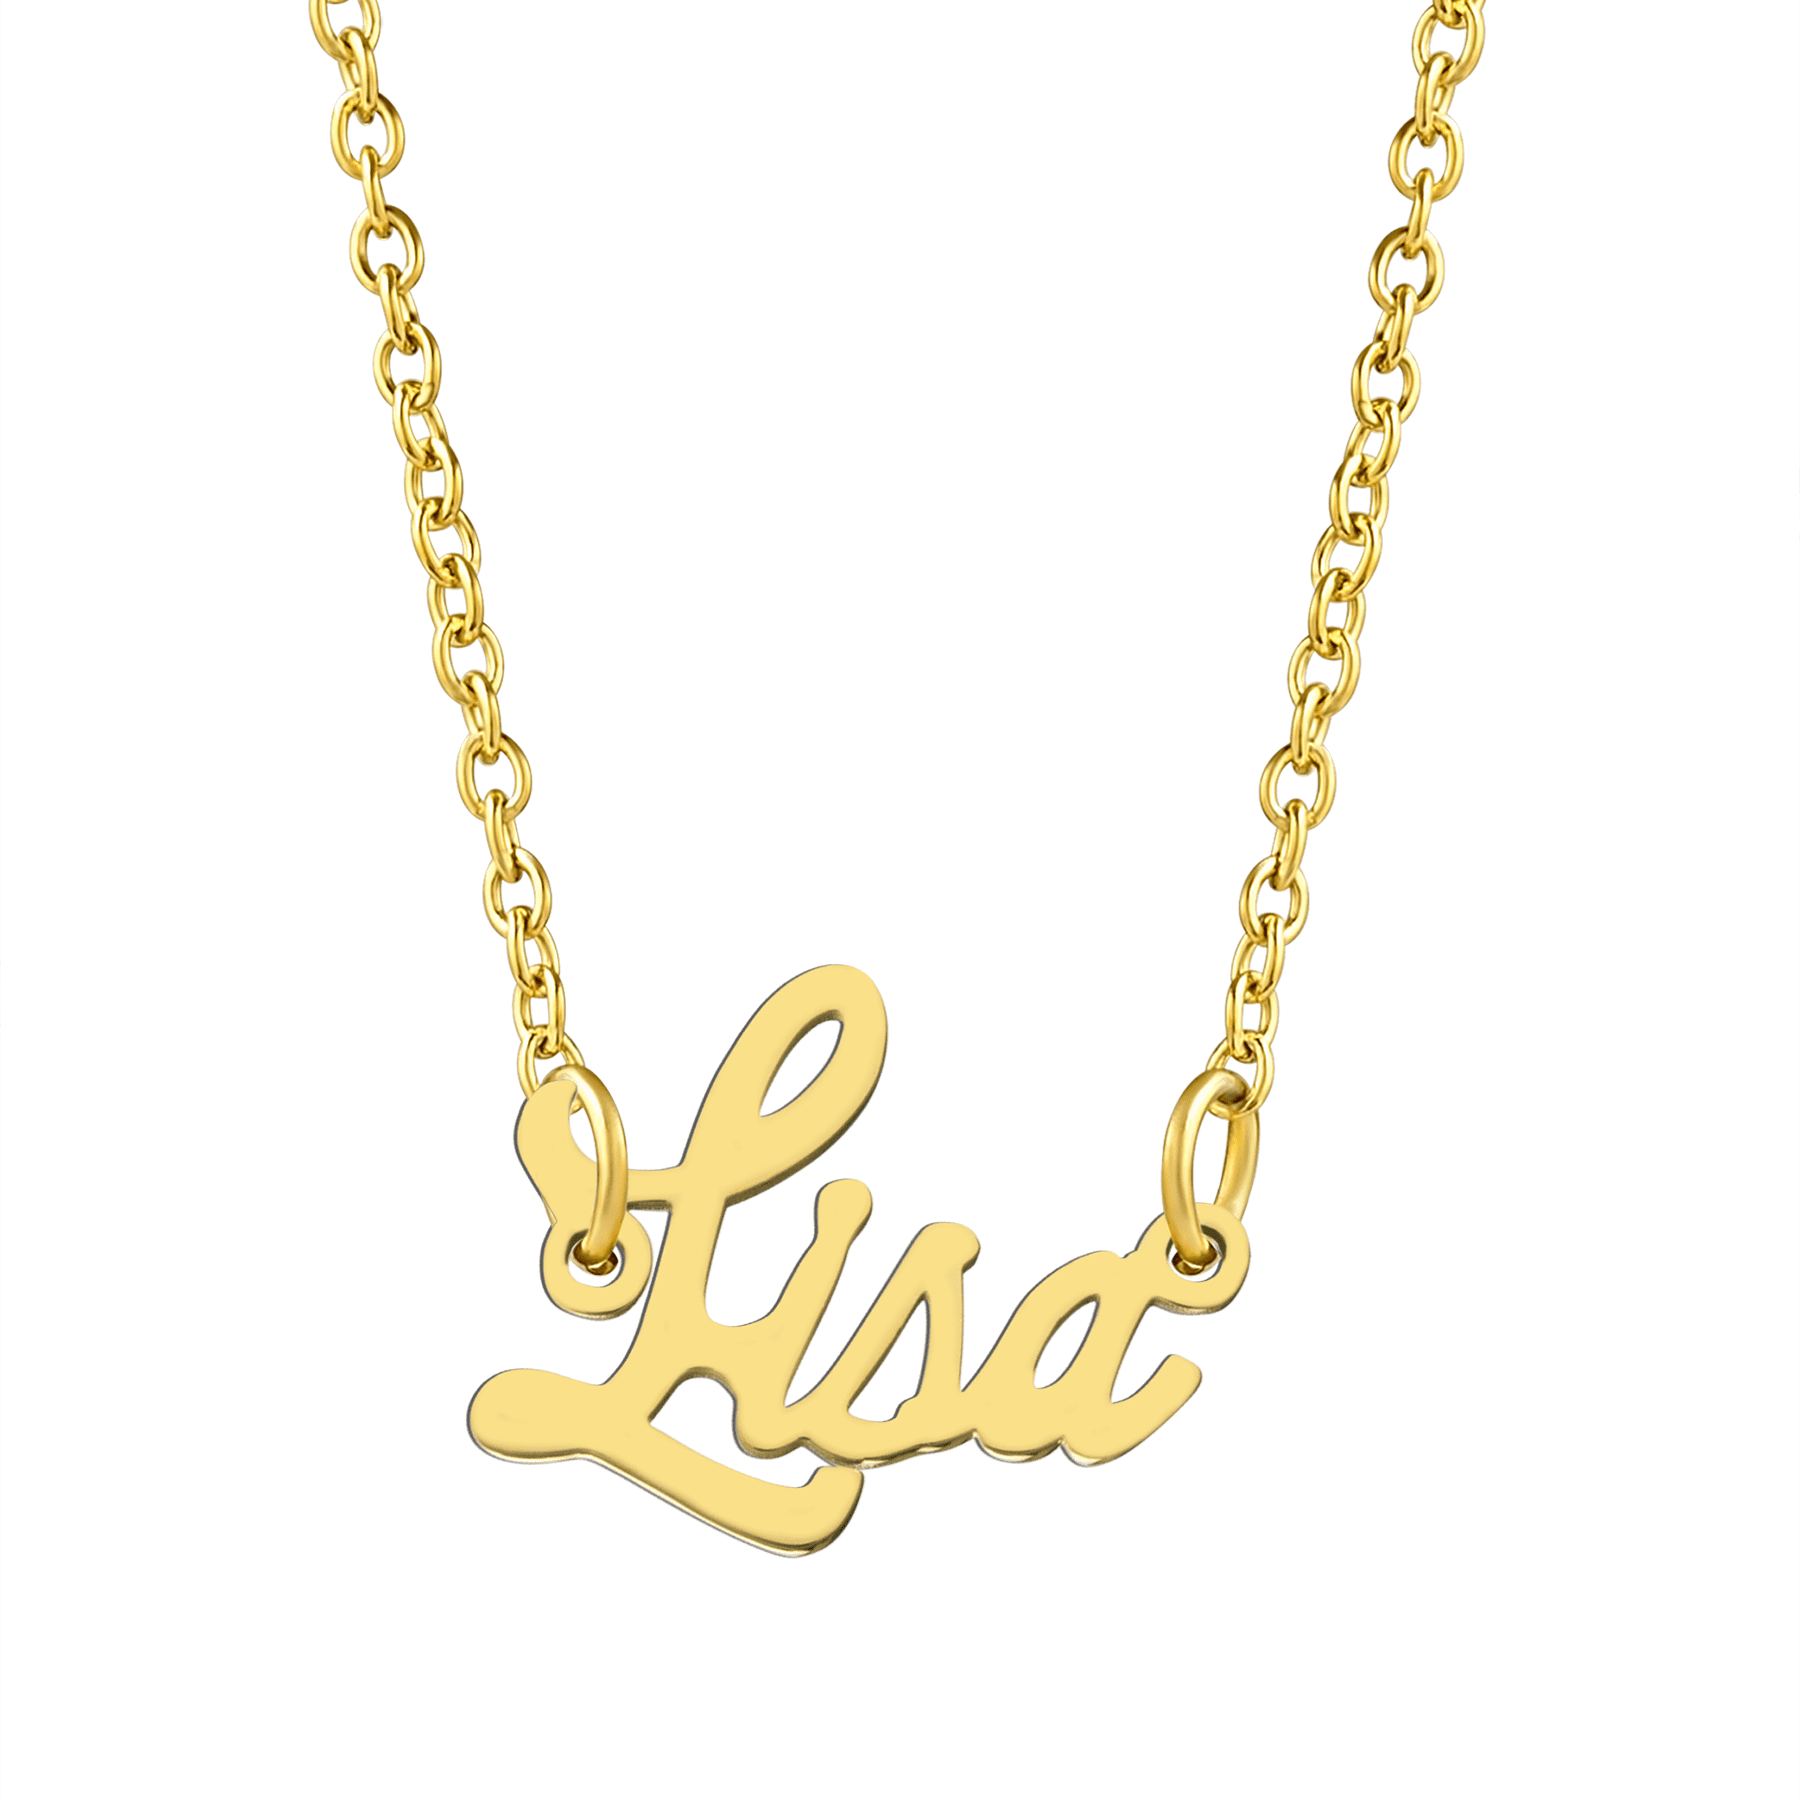 KISPER 18K Gold Stainless Steel Name Pendant Necklace w/ Lobster Clasp ...